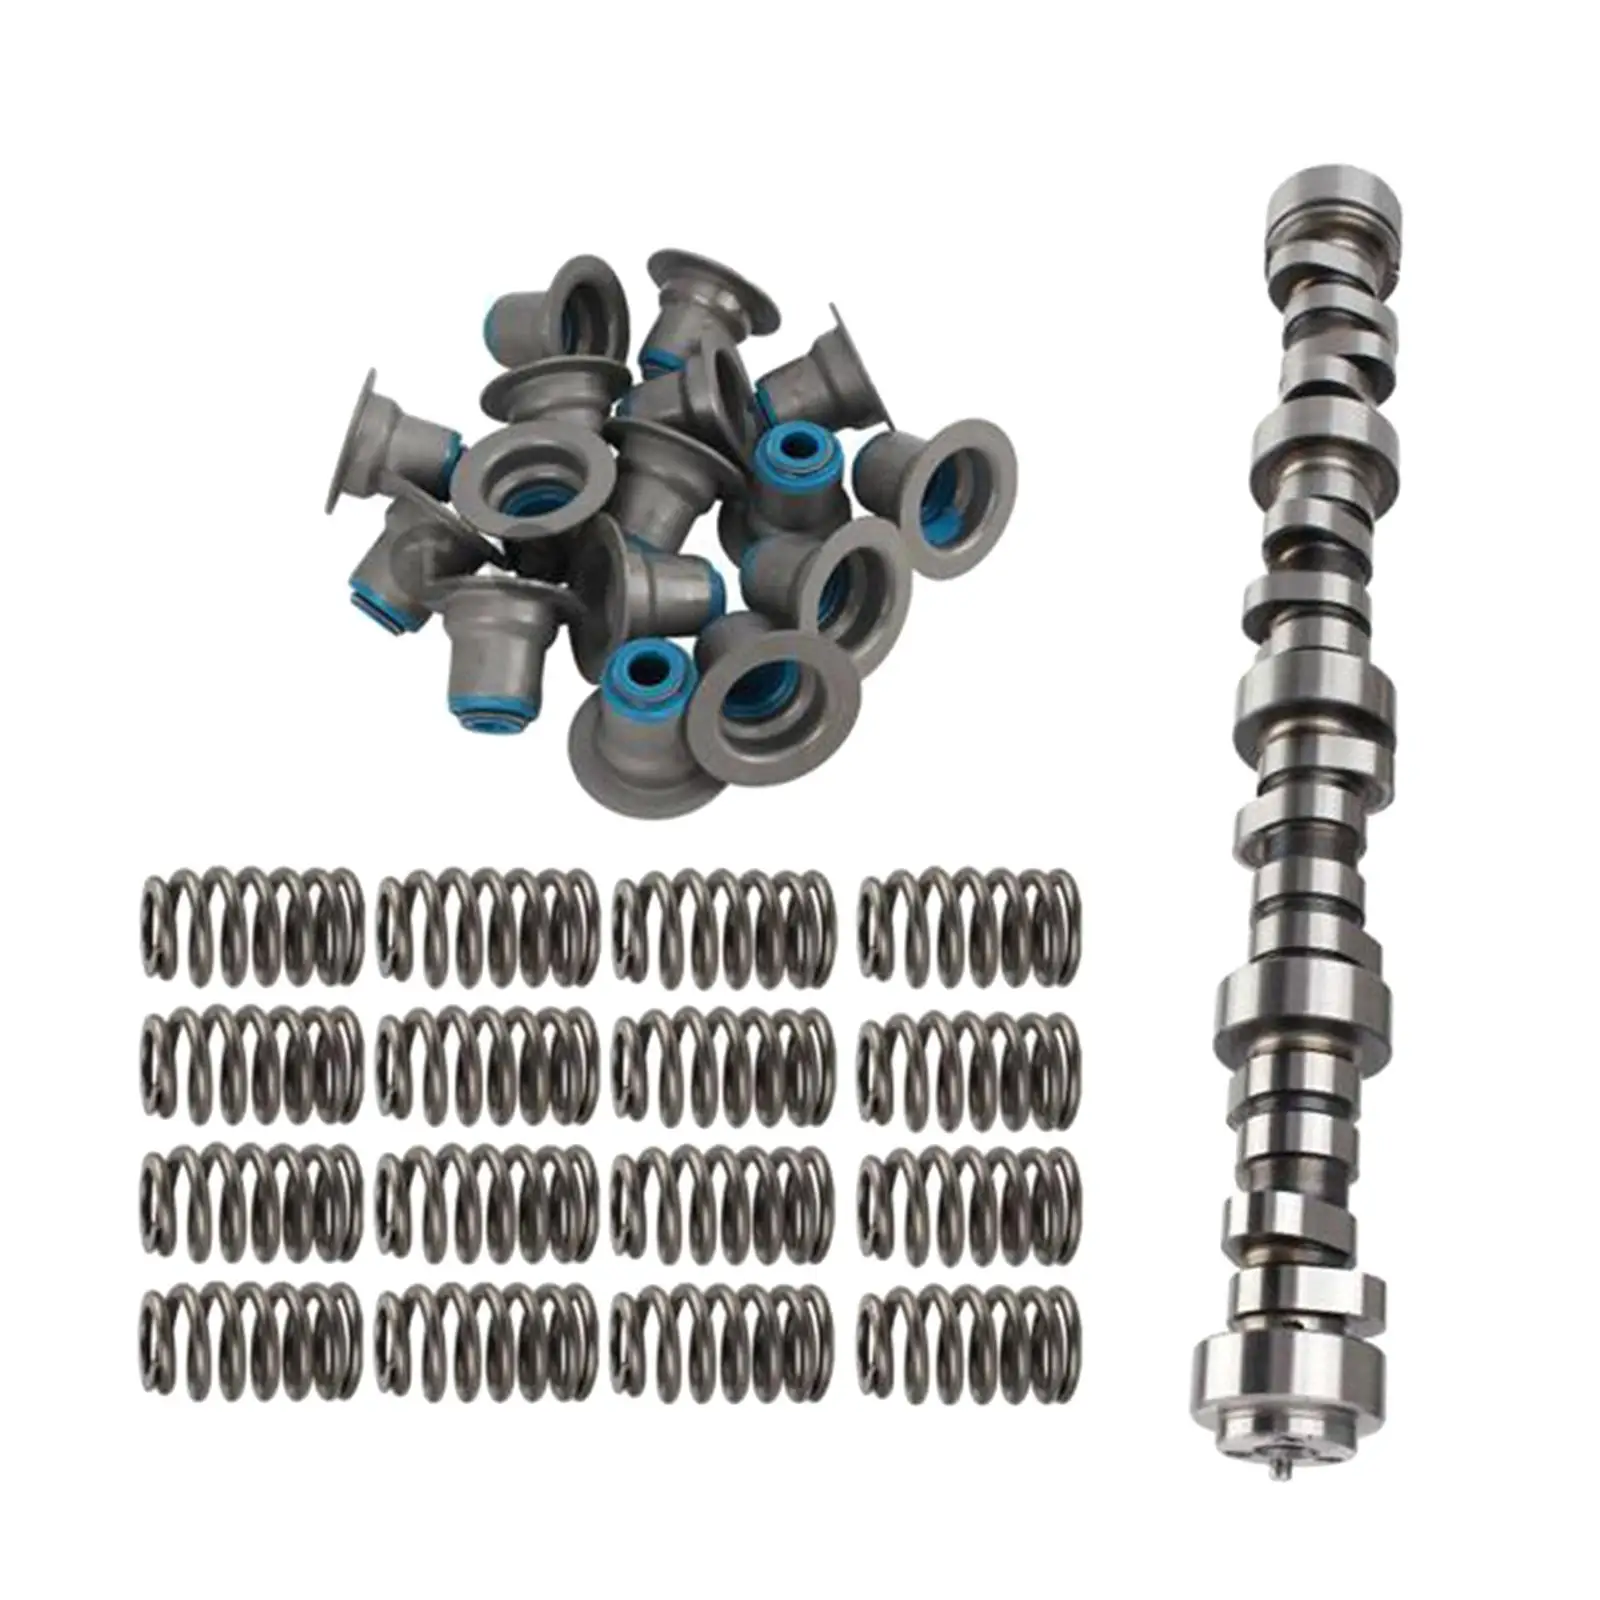 cam Kit 31218132 Accessories High Performance Metal Directly Replace for Sierra Stage 2 V2 LS Truck 4.8L 5.3L 6.0L 6.2L